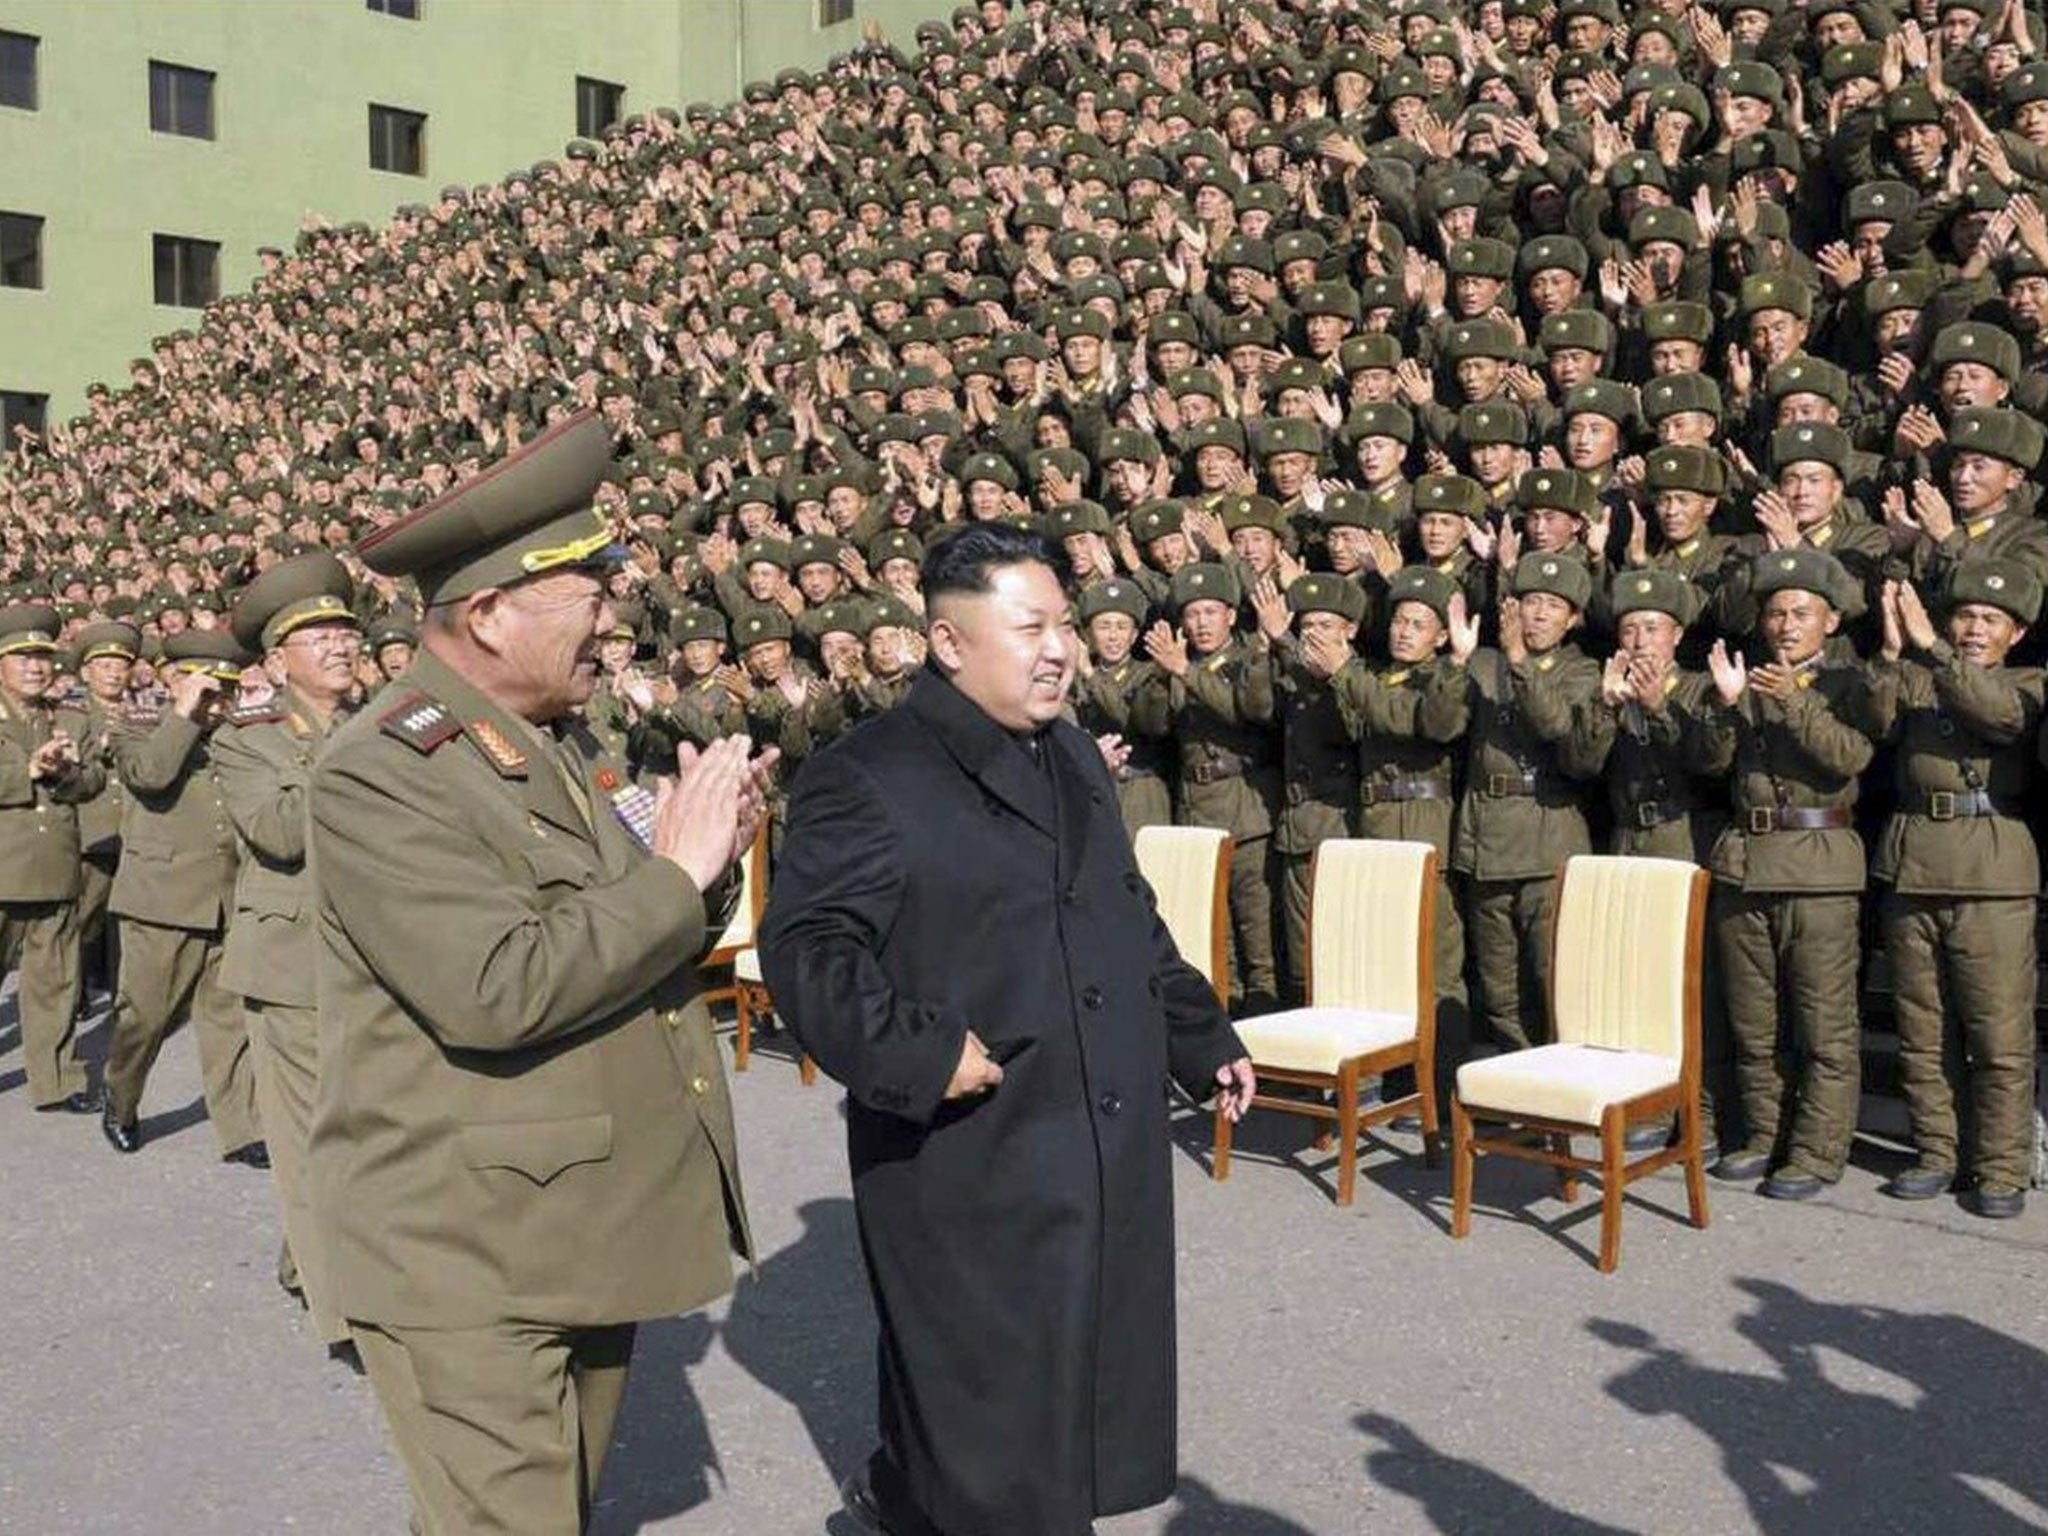 North Korean Central News Agency (KCNA) on 05 November 2014 shows North Korean leader Kim Jong-un attending an event with military commanders